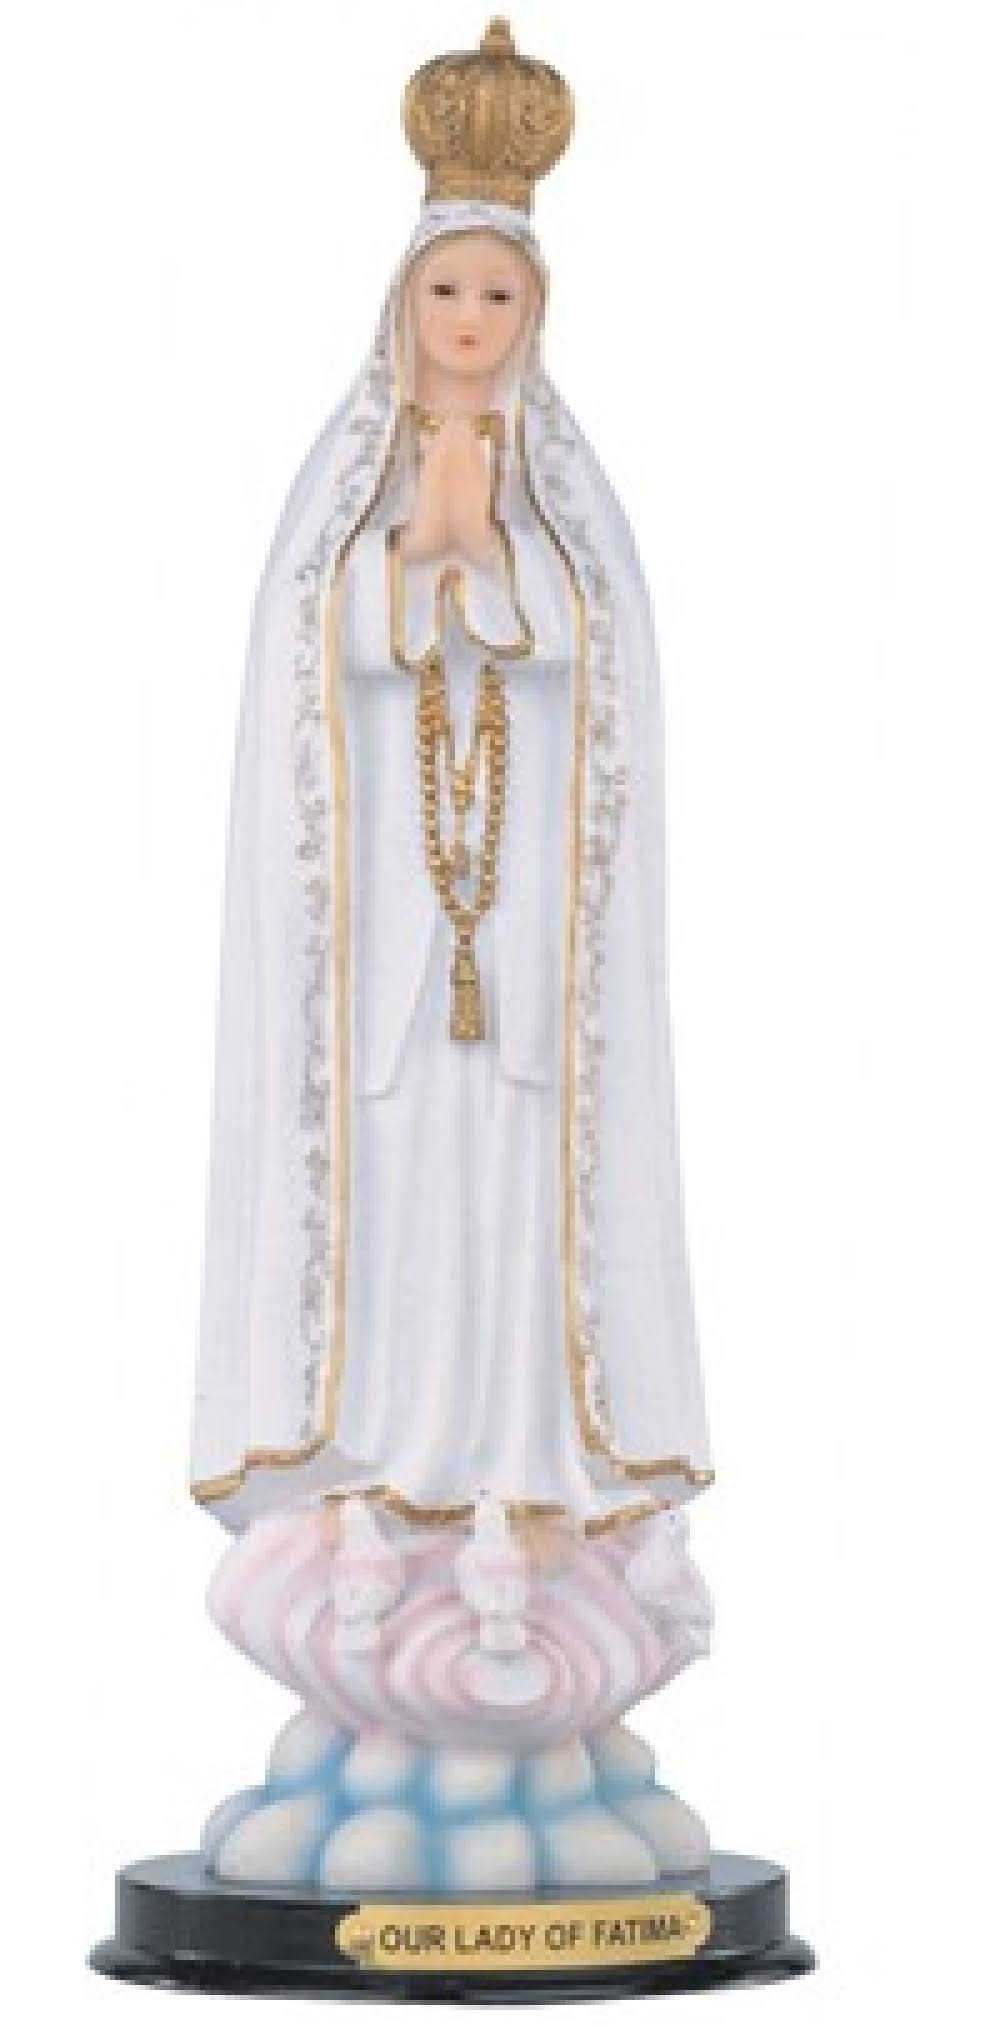 Stealstreet Ss-G-312.06 Our Lady of Fatima Holy Figurine Religious Decoration Decor, 12"